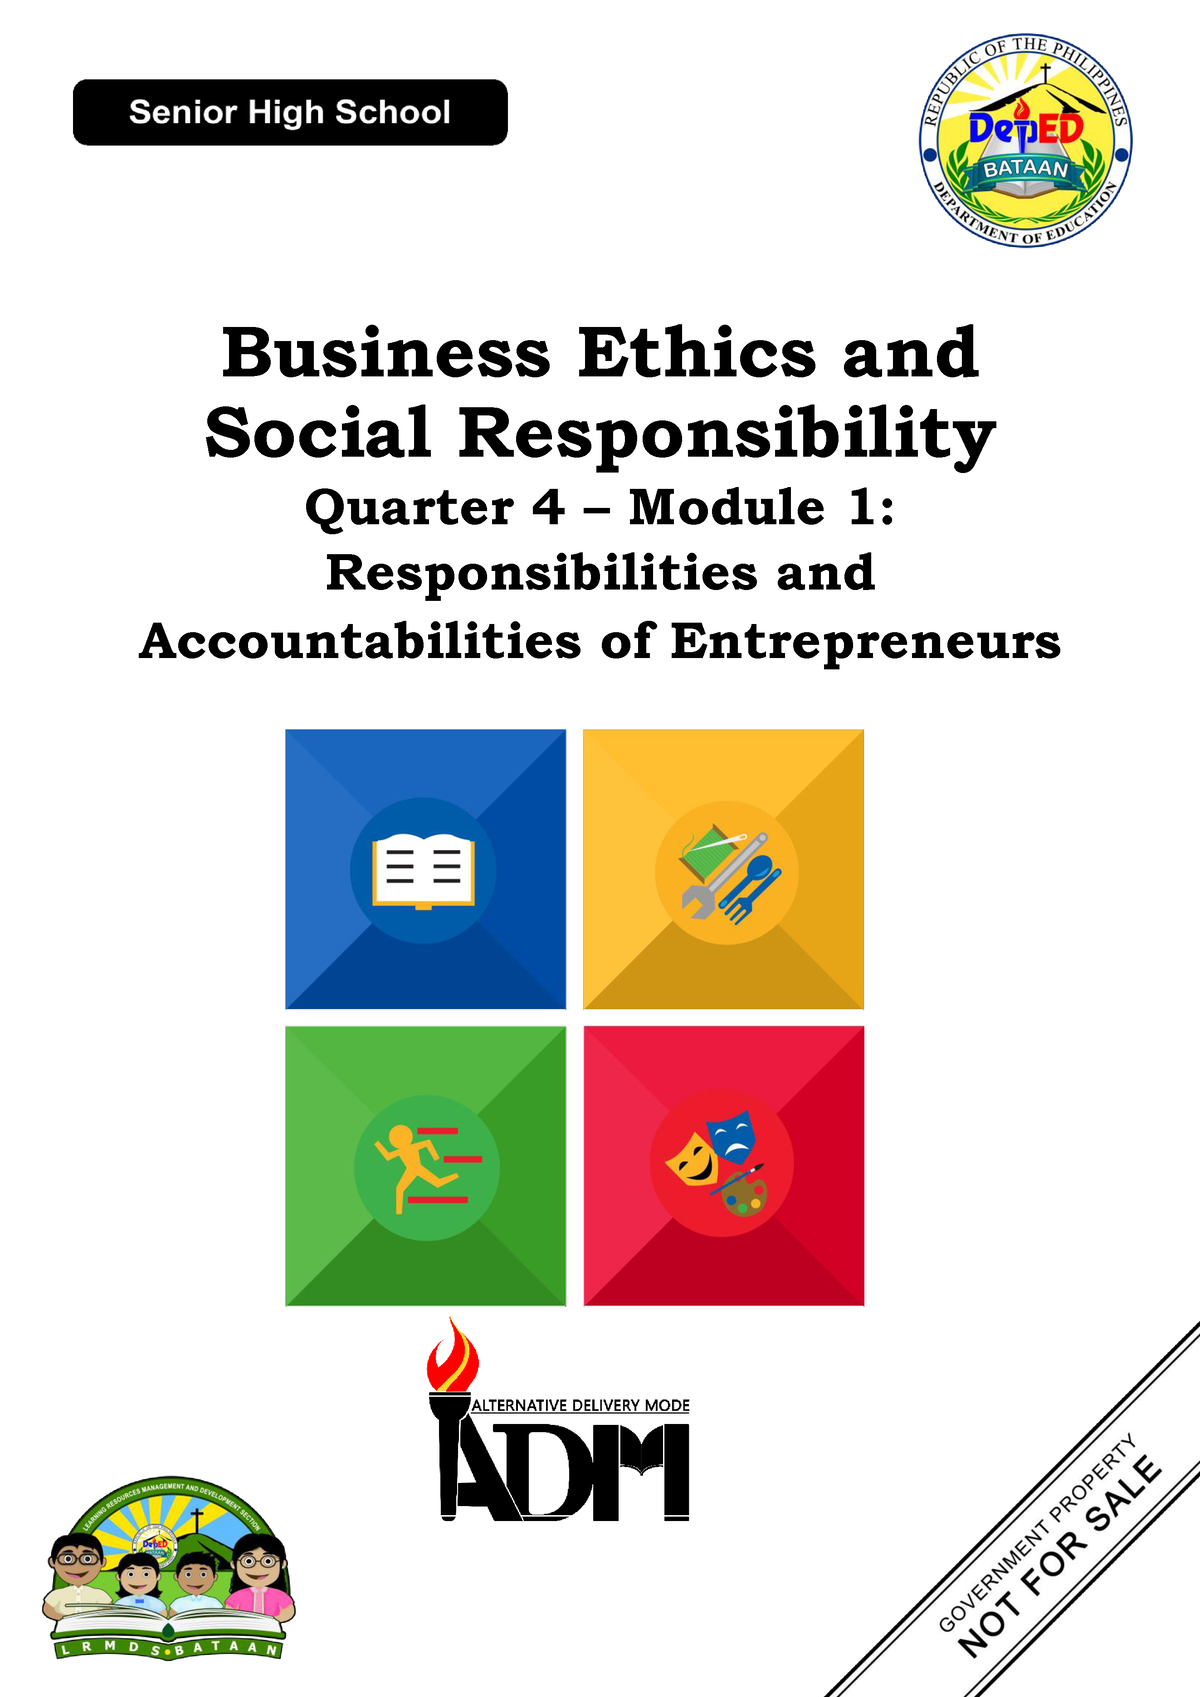 bus-ethics-q4-mod1-responsibilities-and-accountabilities-of